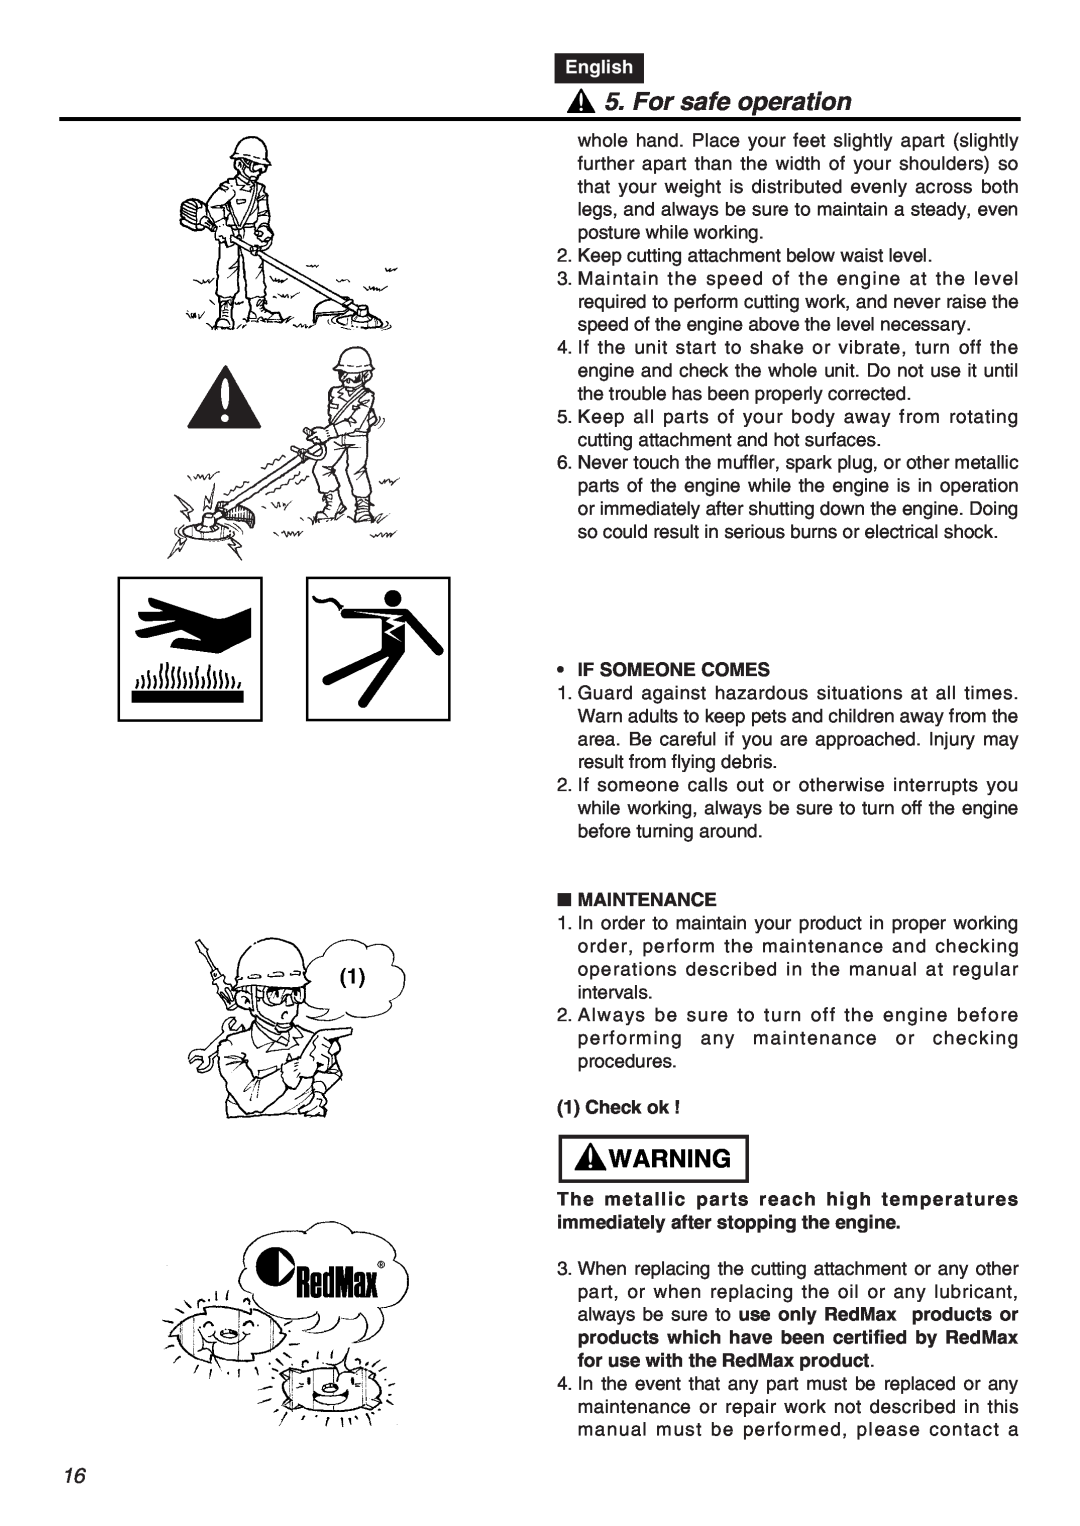 RedMax EXZ2401S-PH-CA manual For safe operation, English, If Someone Comes, Maintenance, Check ok 